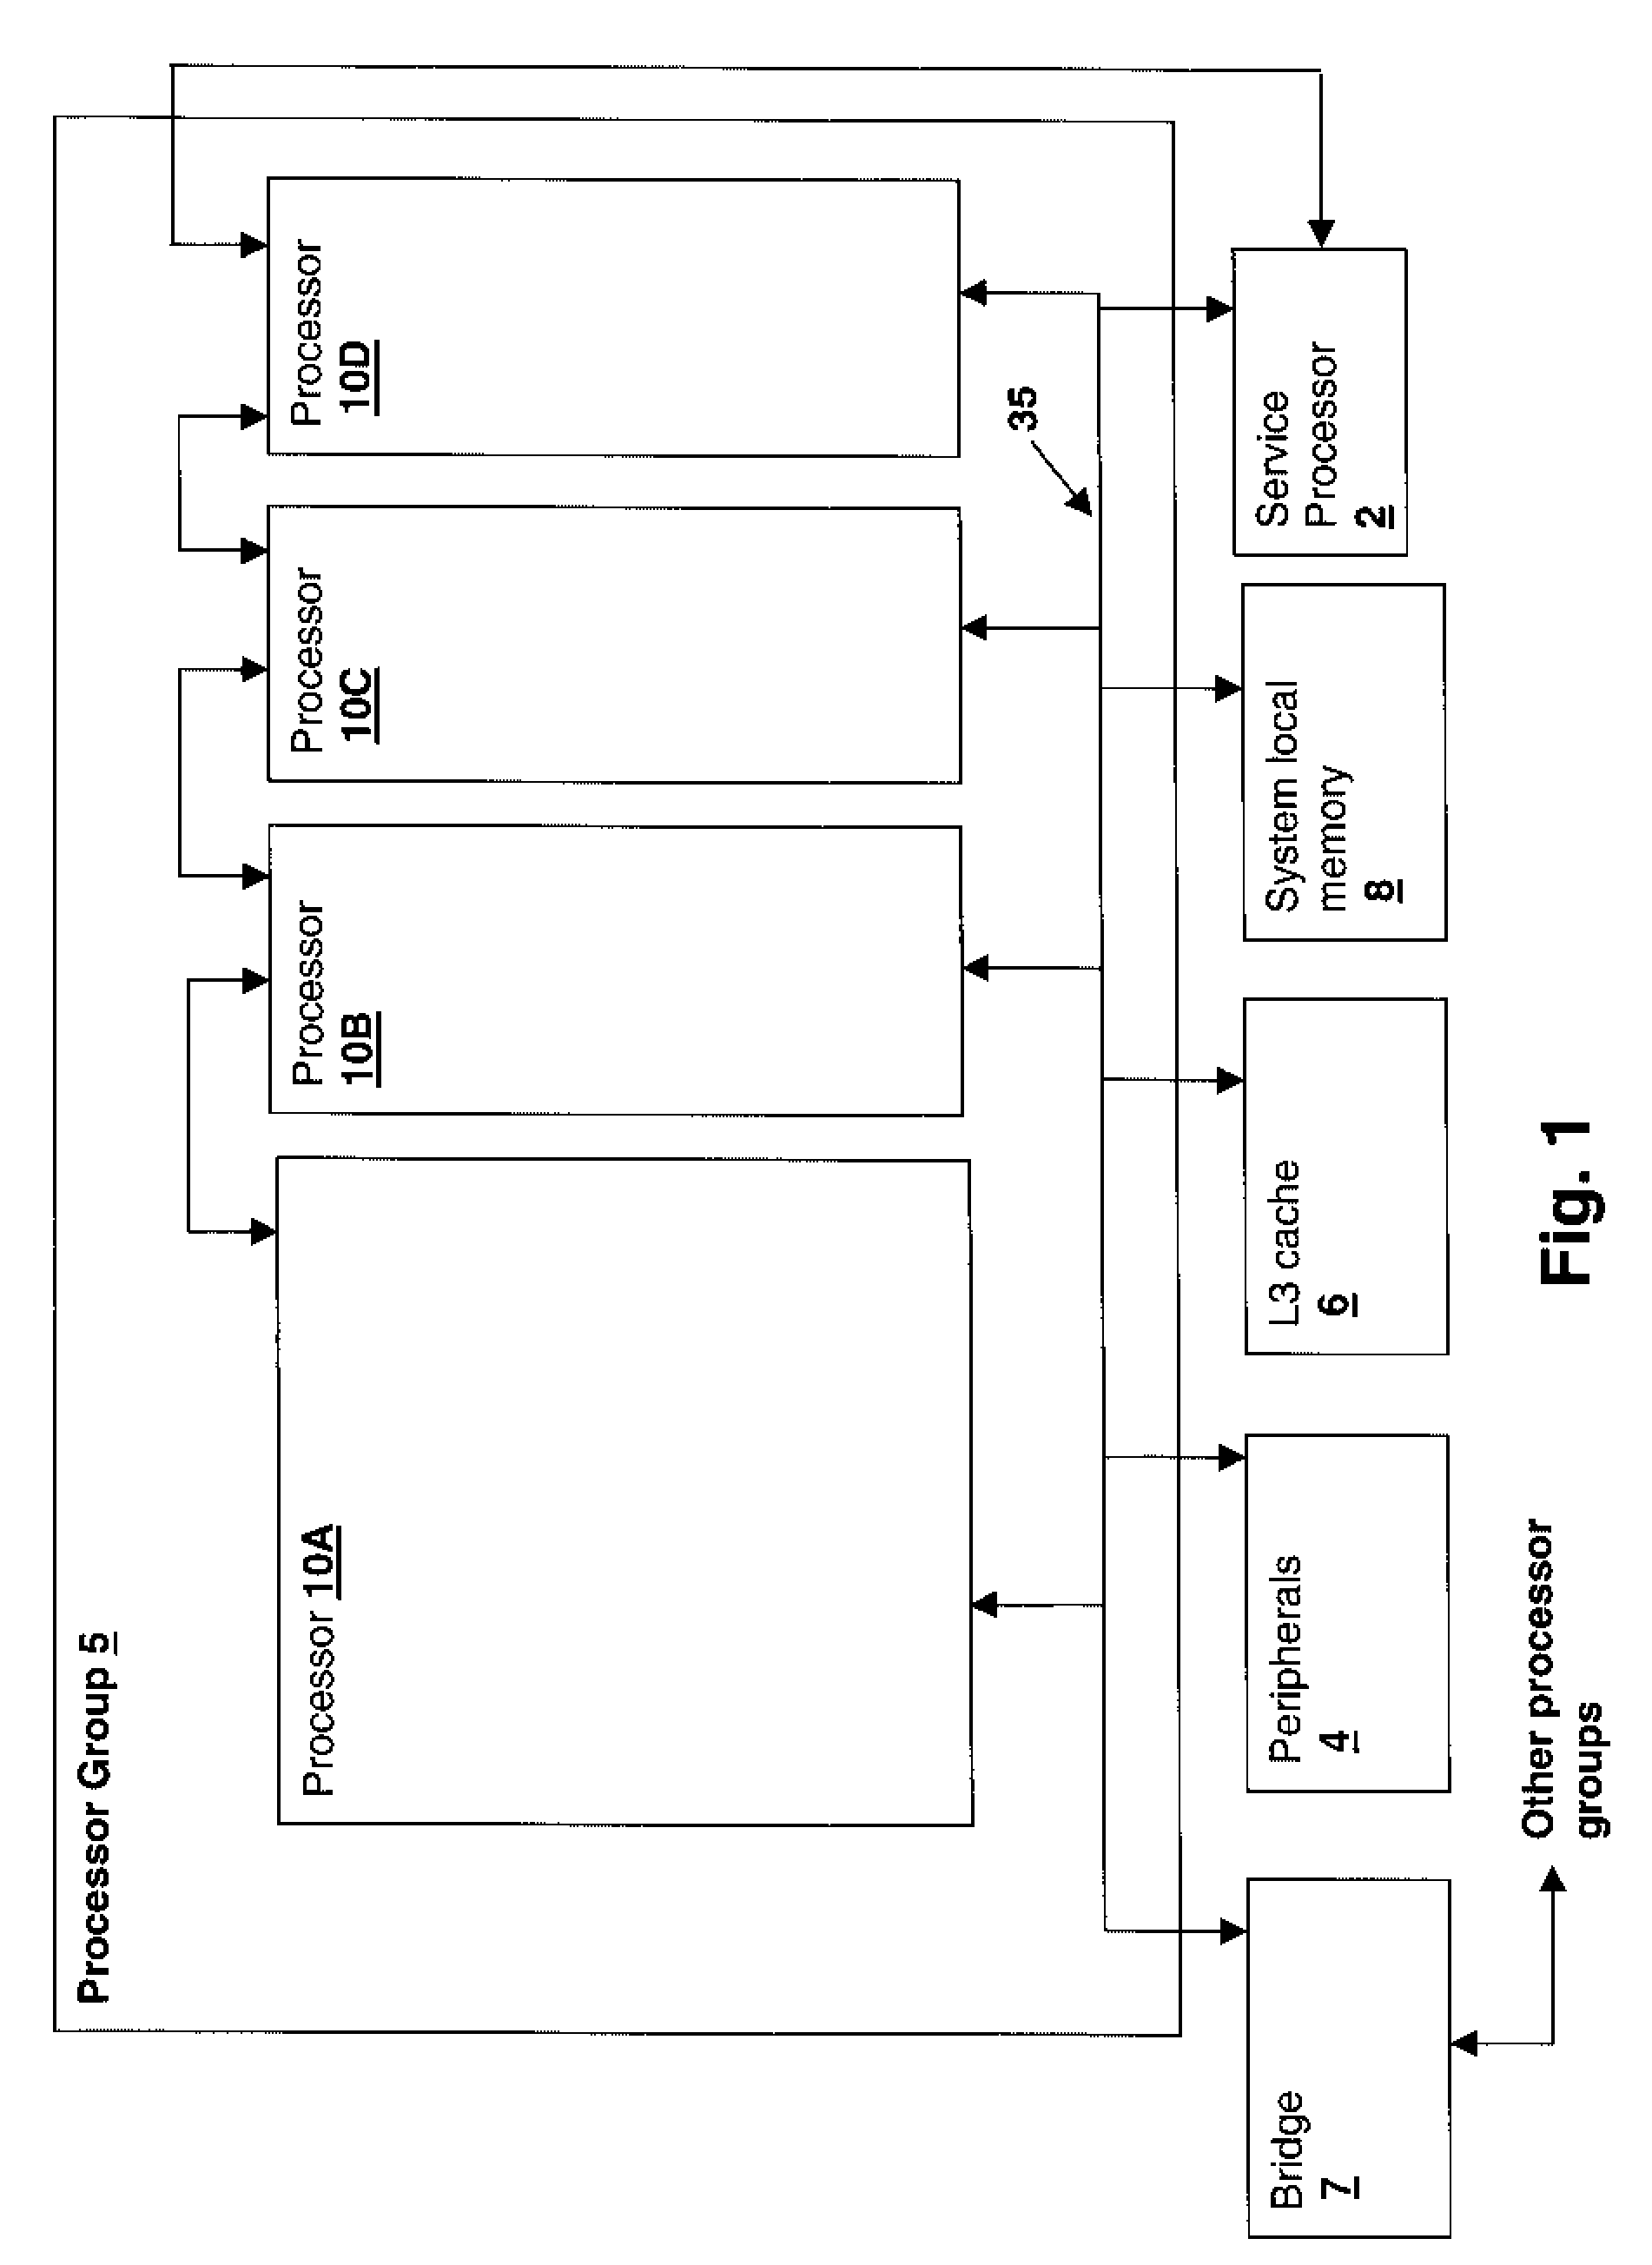 Method and apparatus for dynamically managing instruction buffer depths for non-predicted branches